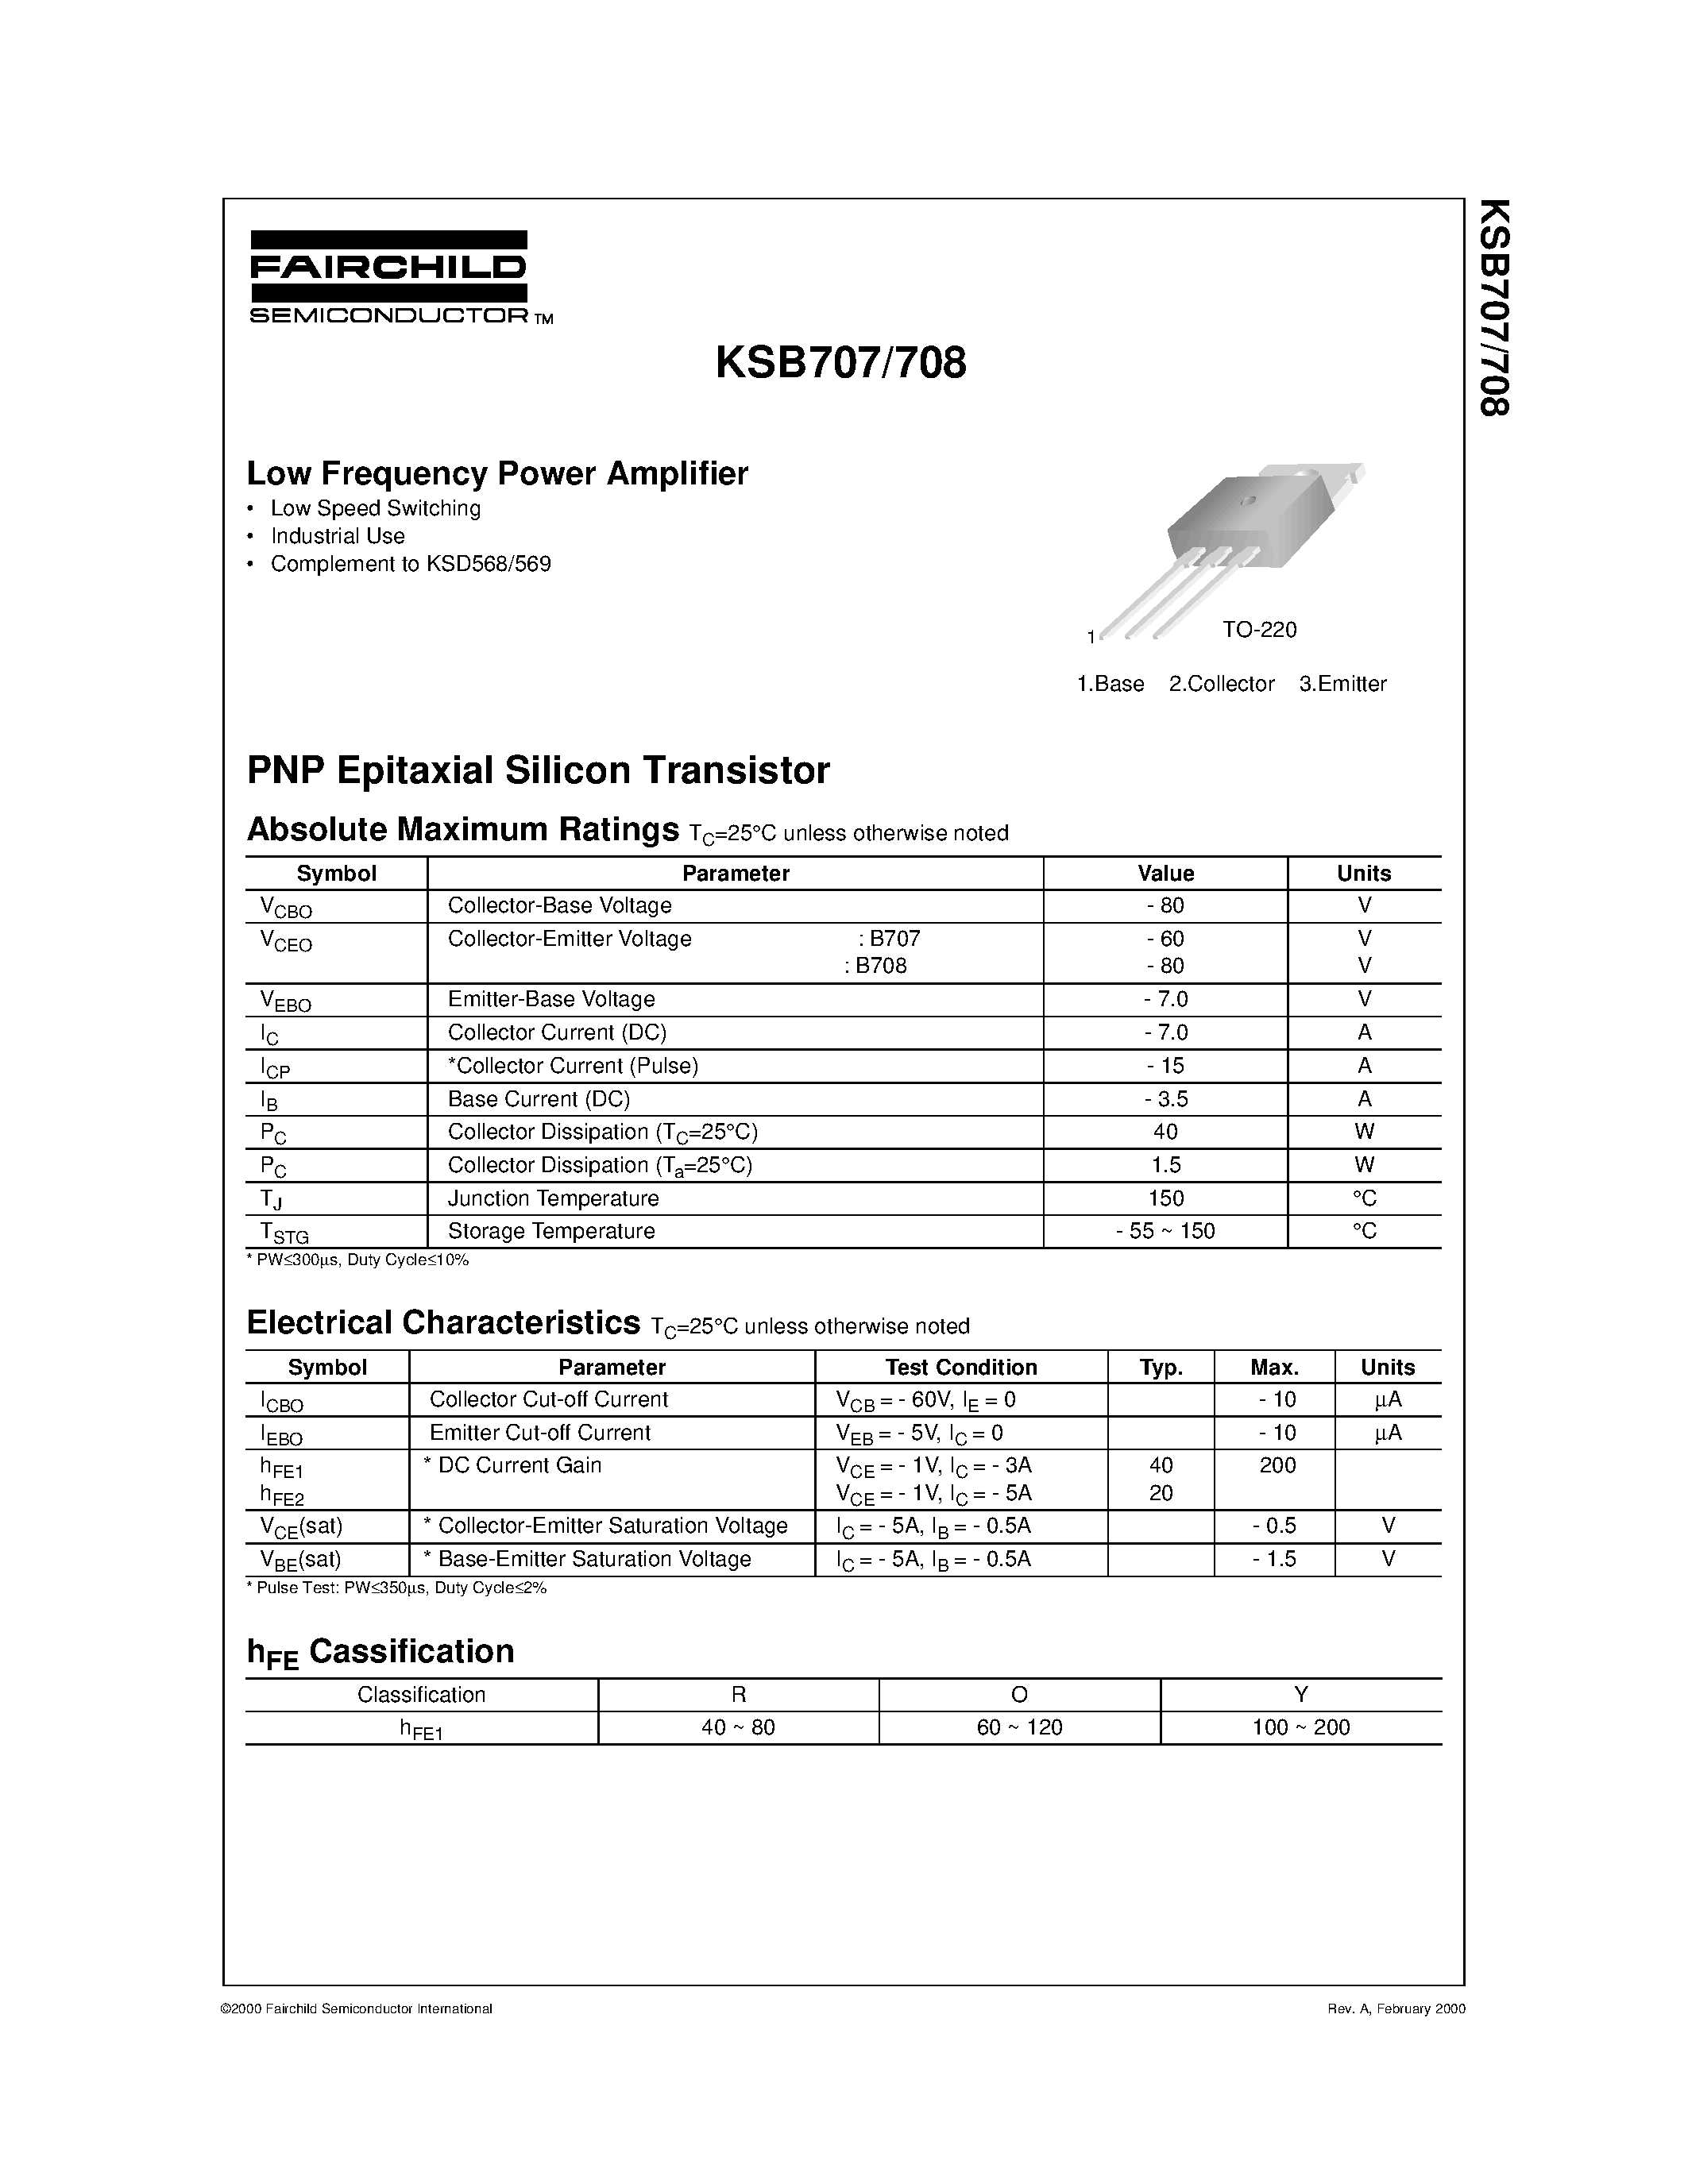 Datasheet KSB707 - Low Frequency Power Amplifier page 1